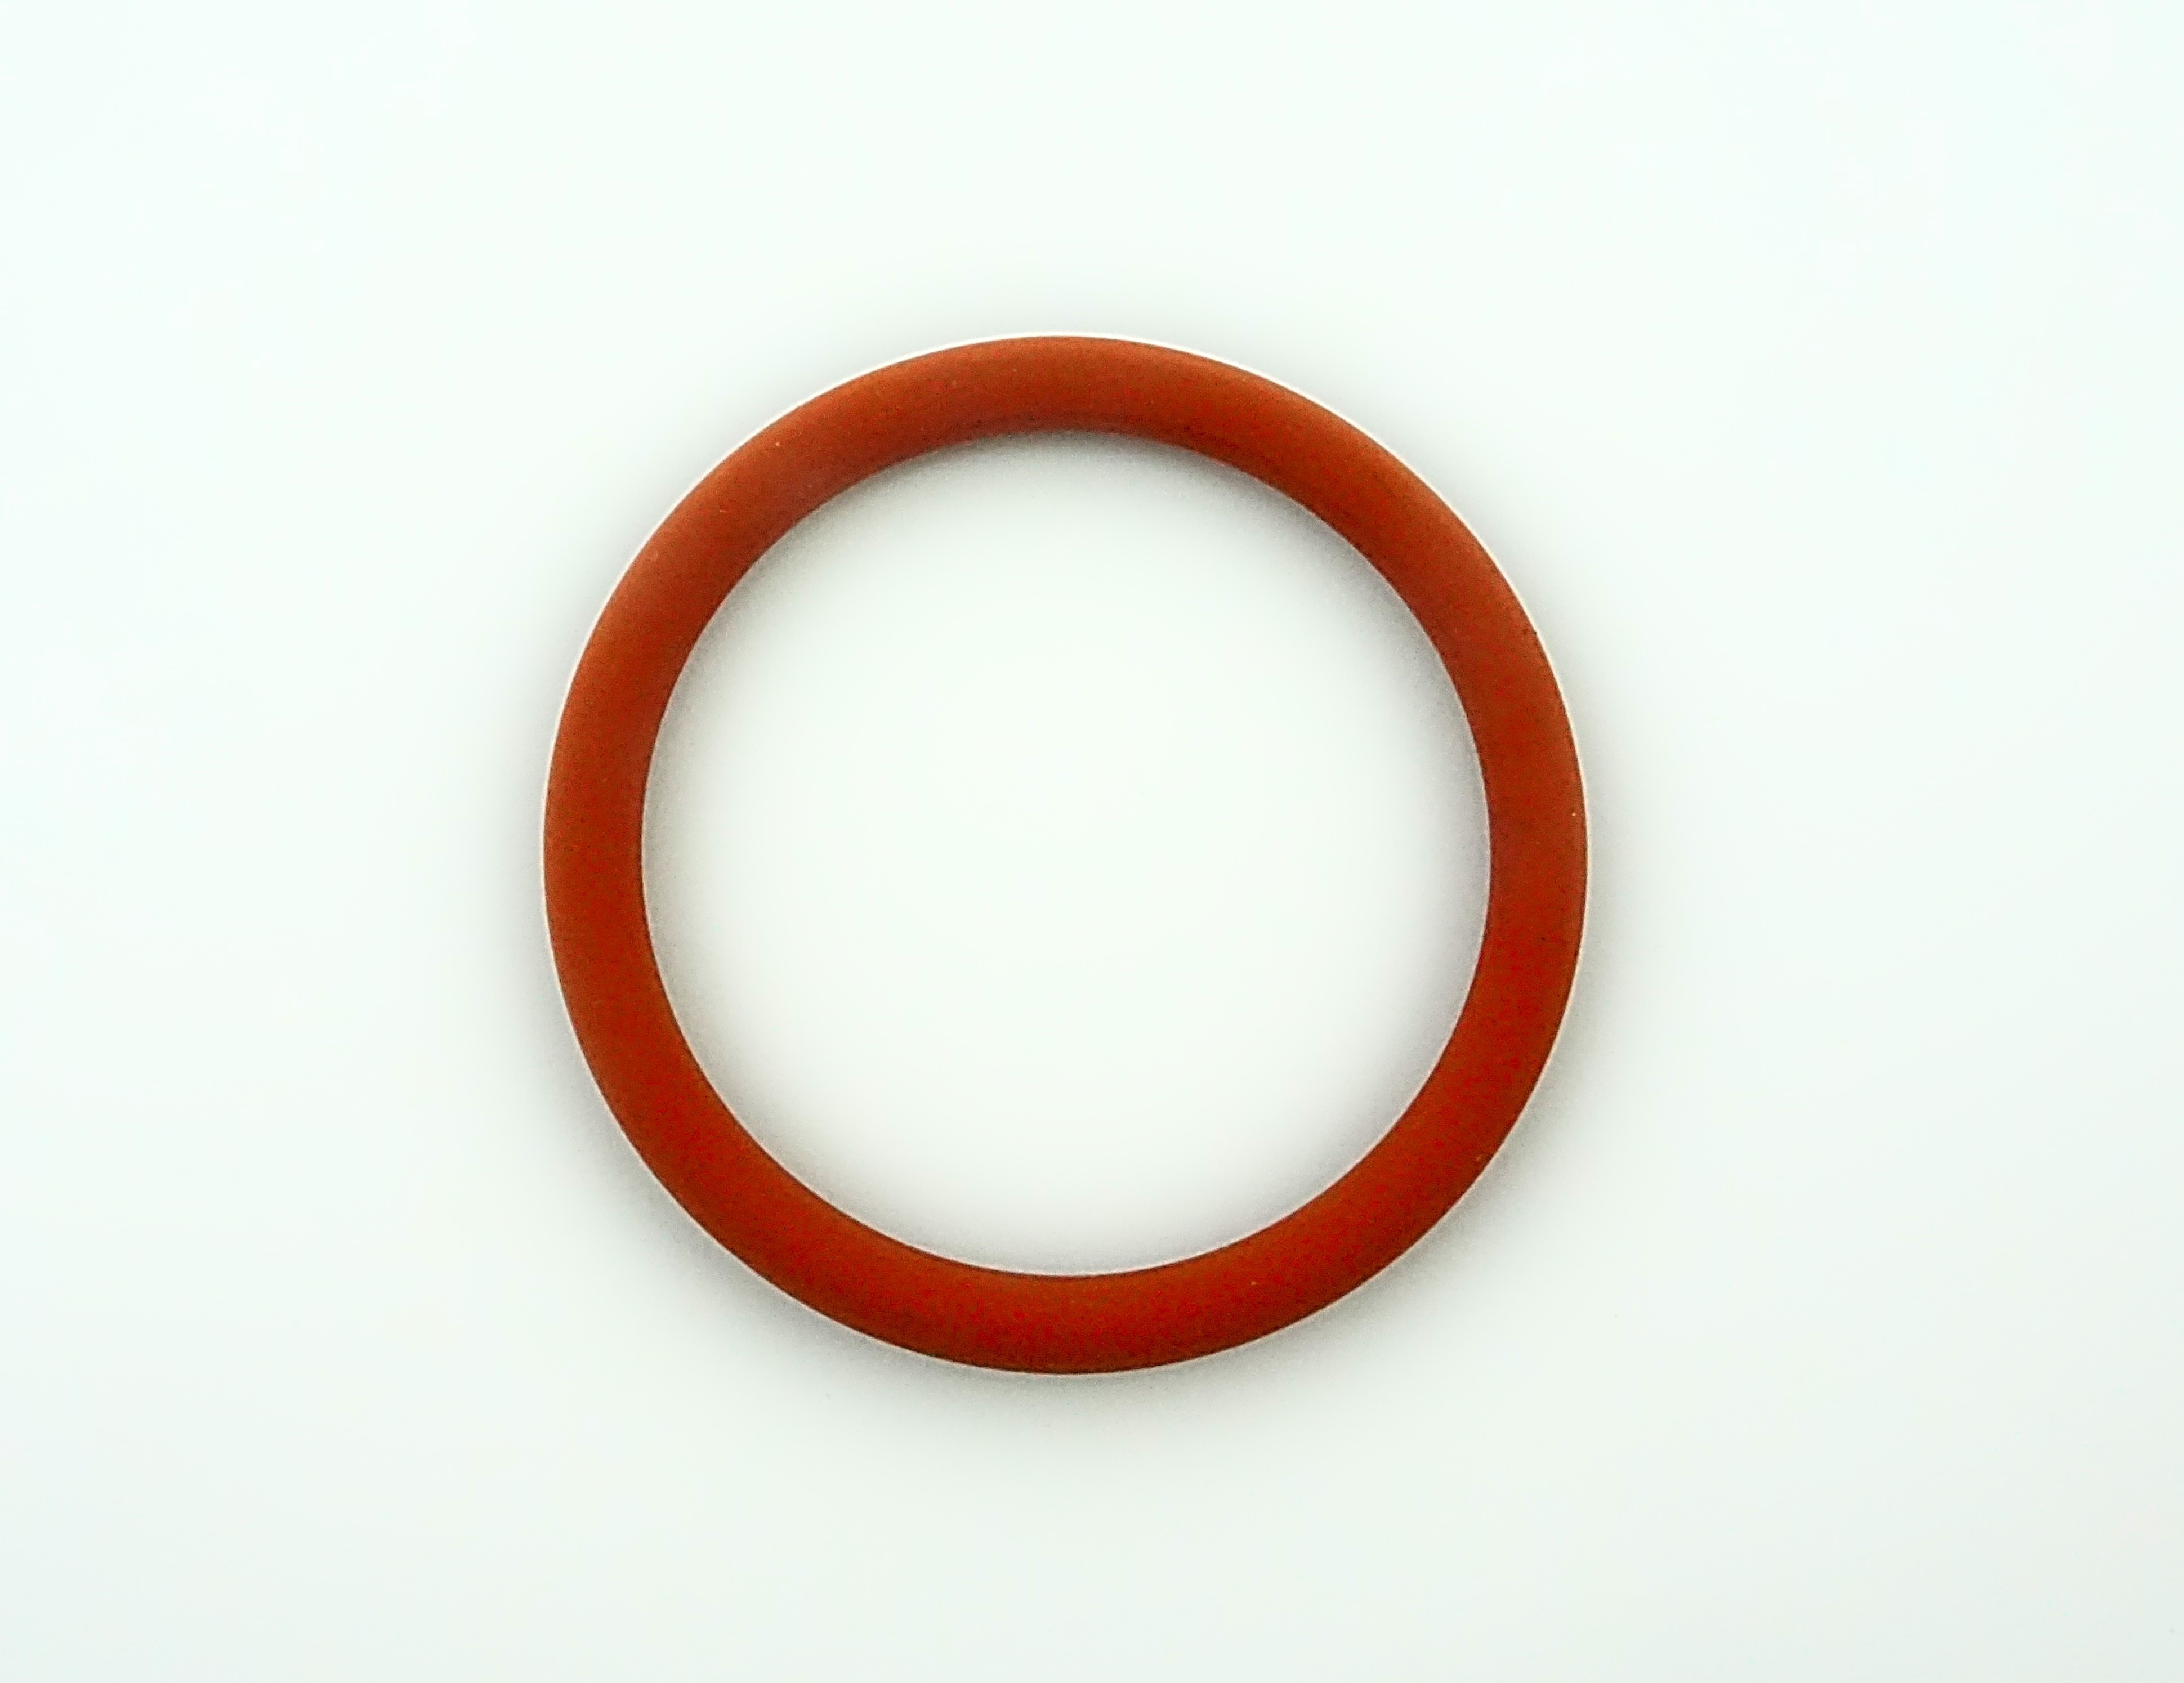 Silicone O-ring 46.99x5.33mm